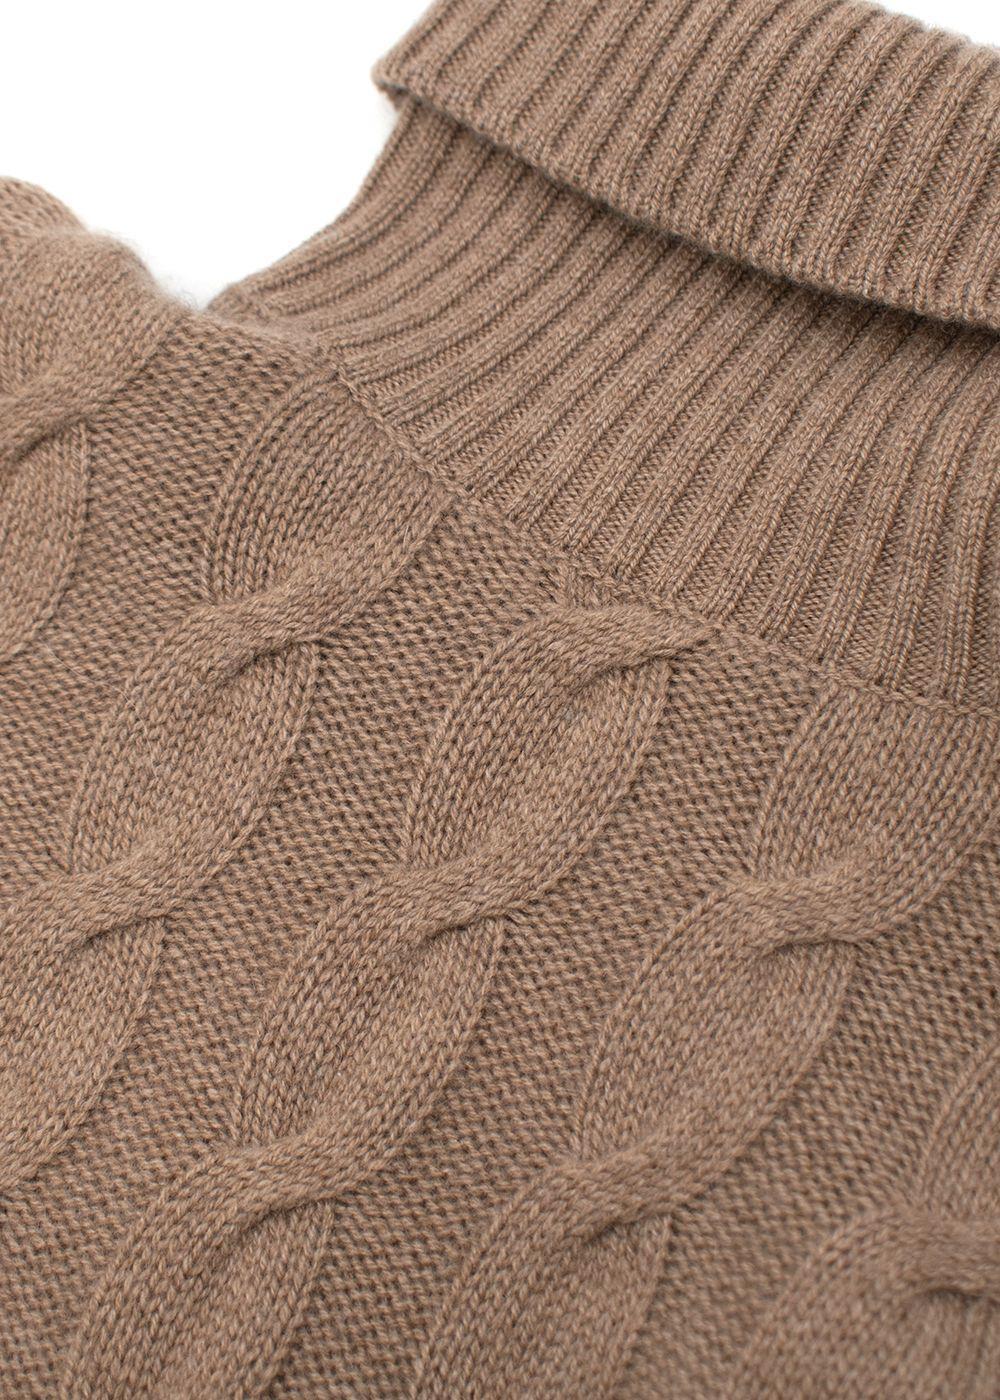 Loro Piana Light Brown Cable Knit Baby Cashmere Sweater - US 0-2 In Excellent Condition For Sale In London, GB